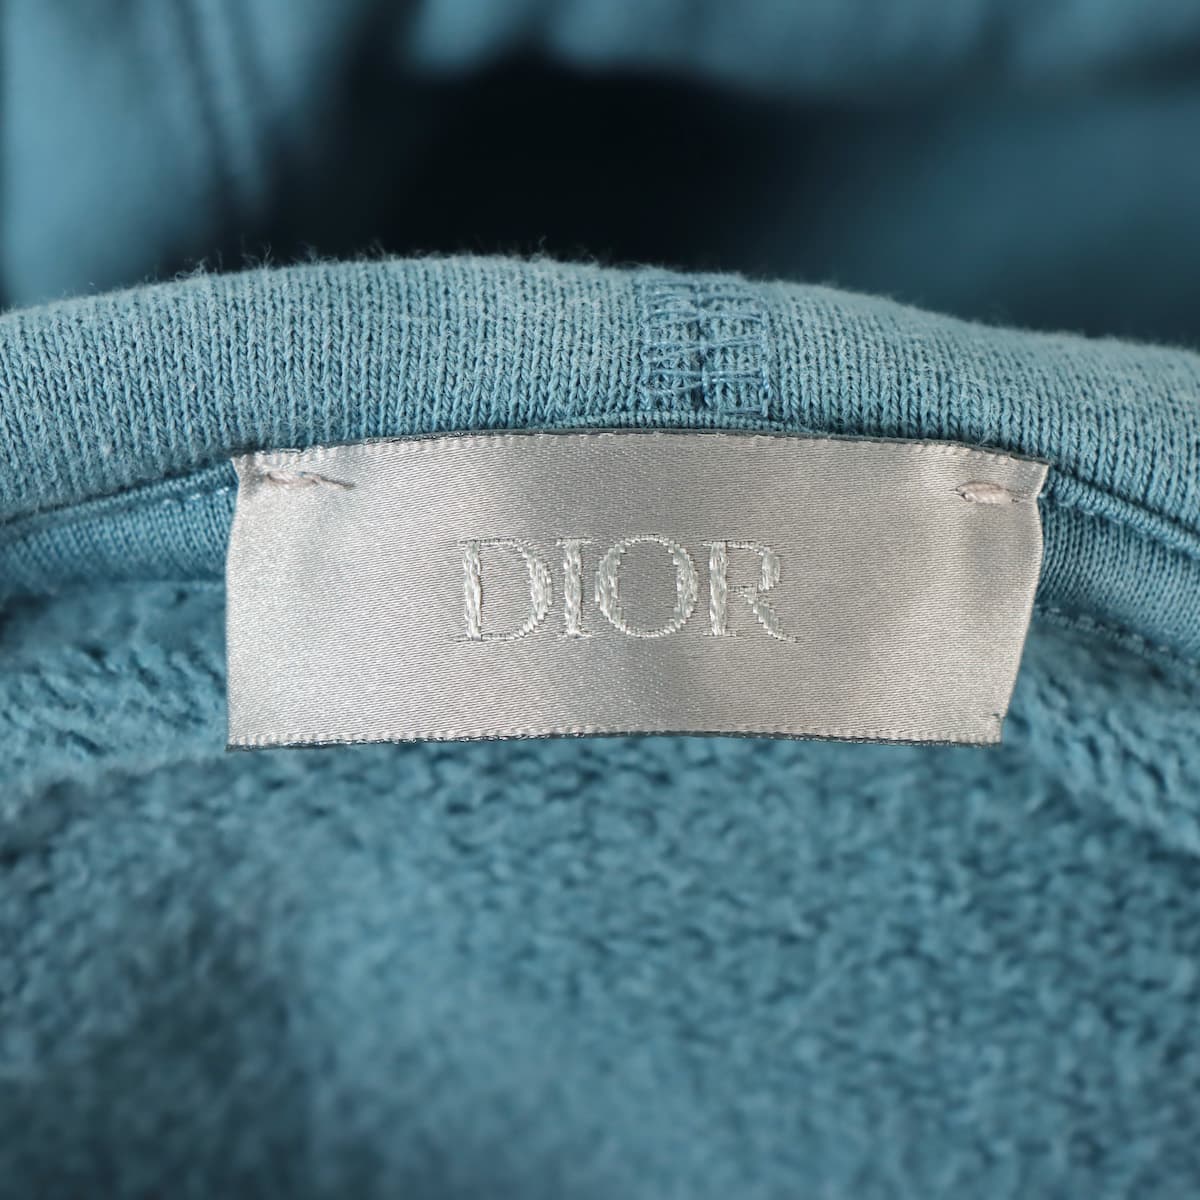 Dior x Peter Doig 21AW Cotton Parker XS Men's Blue  hooded sweatshirt Pullover Logo embroidery 143J688A0531